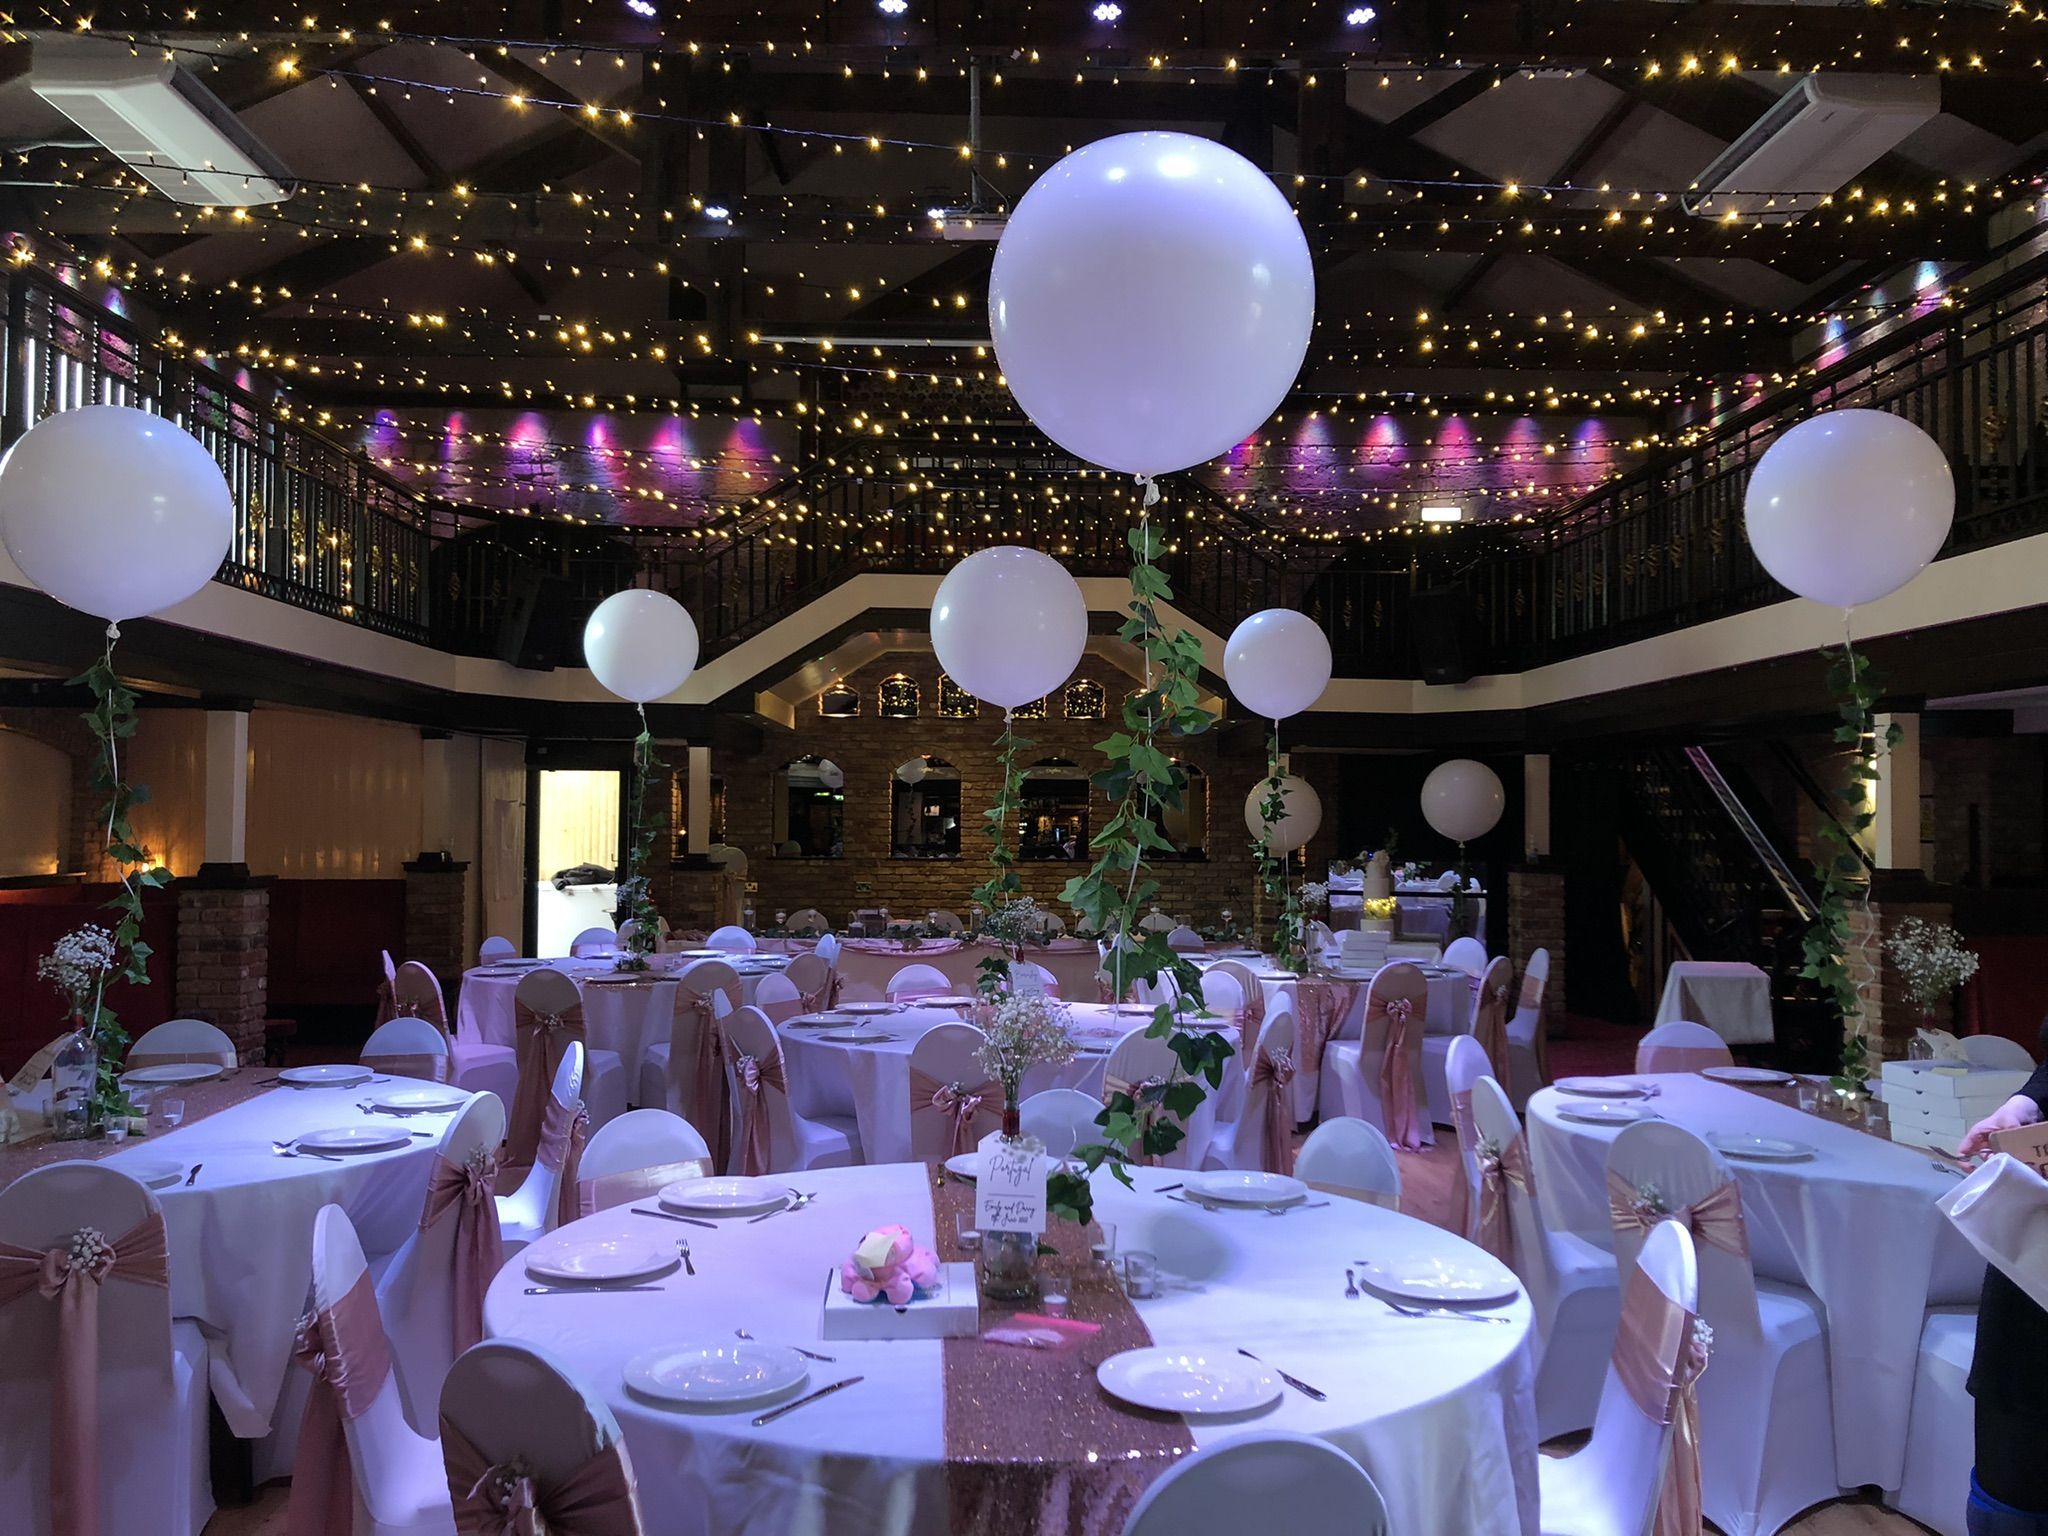 a banquet hall decorated with white and pink decorations.